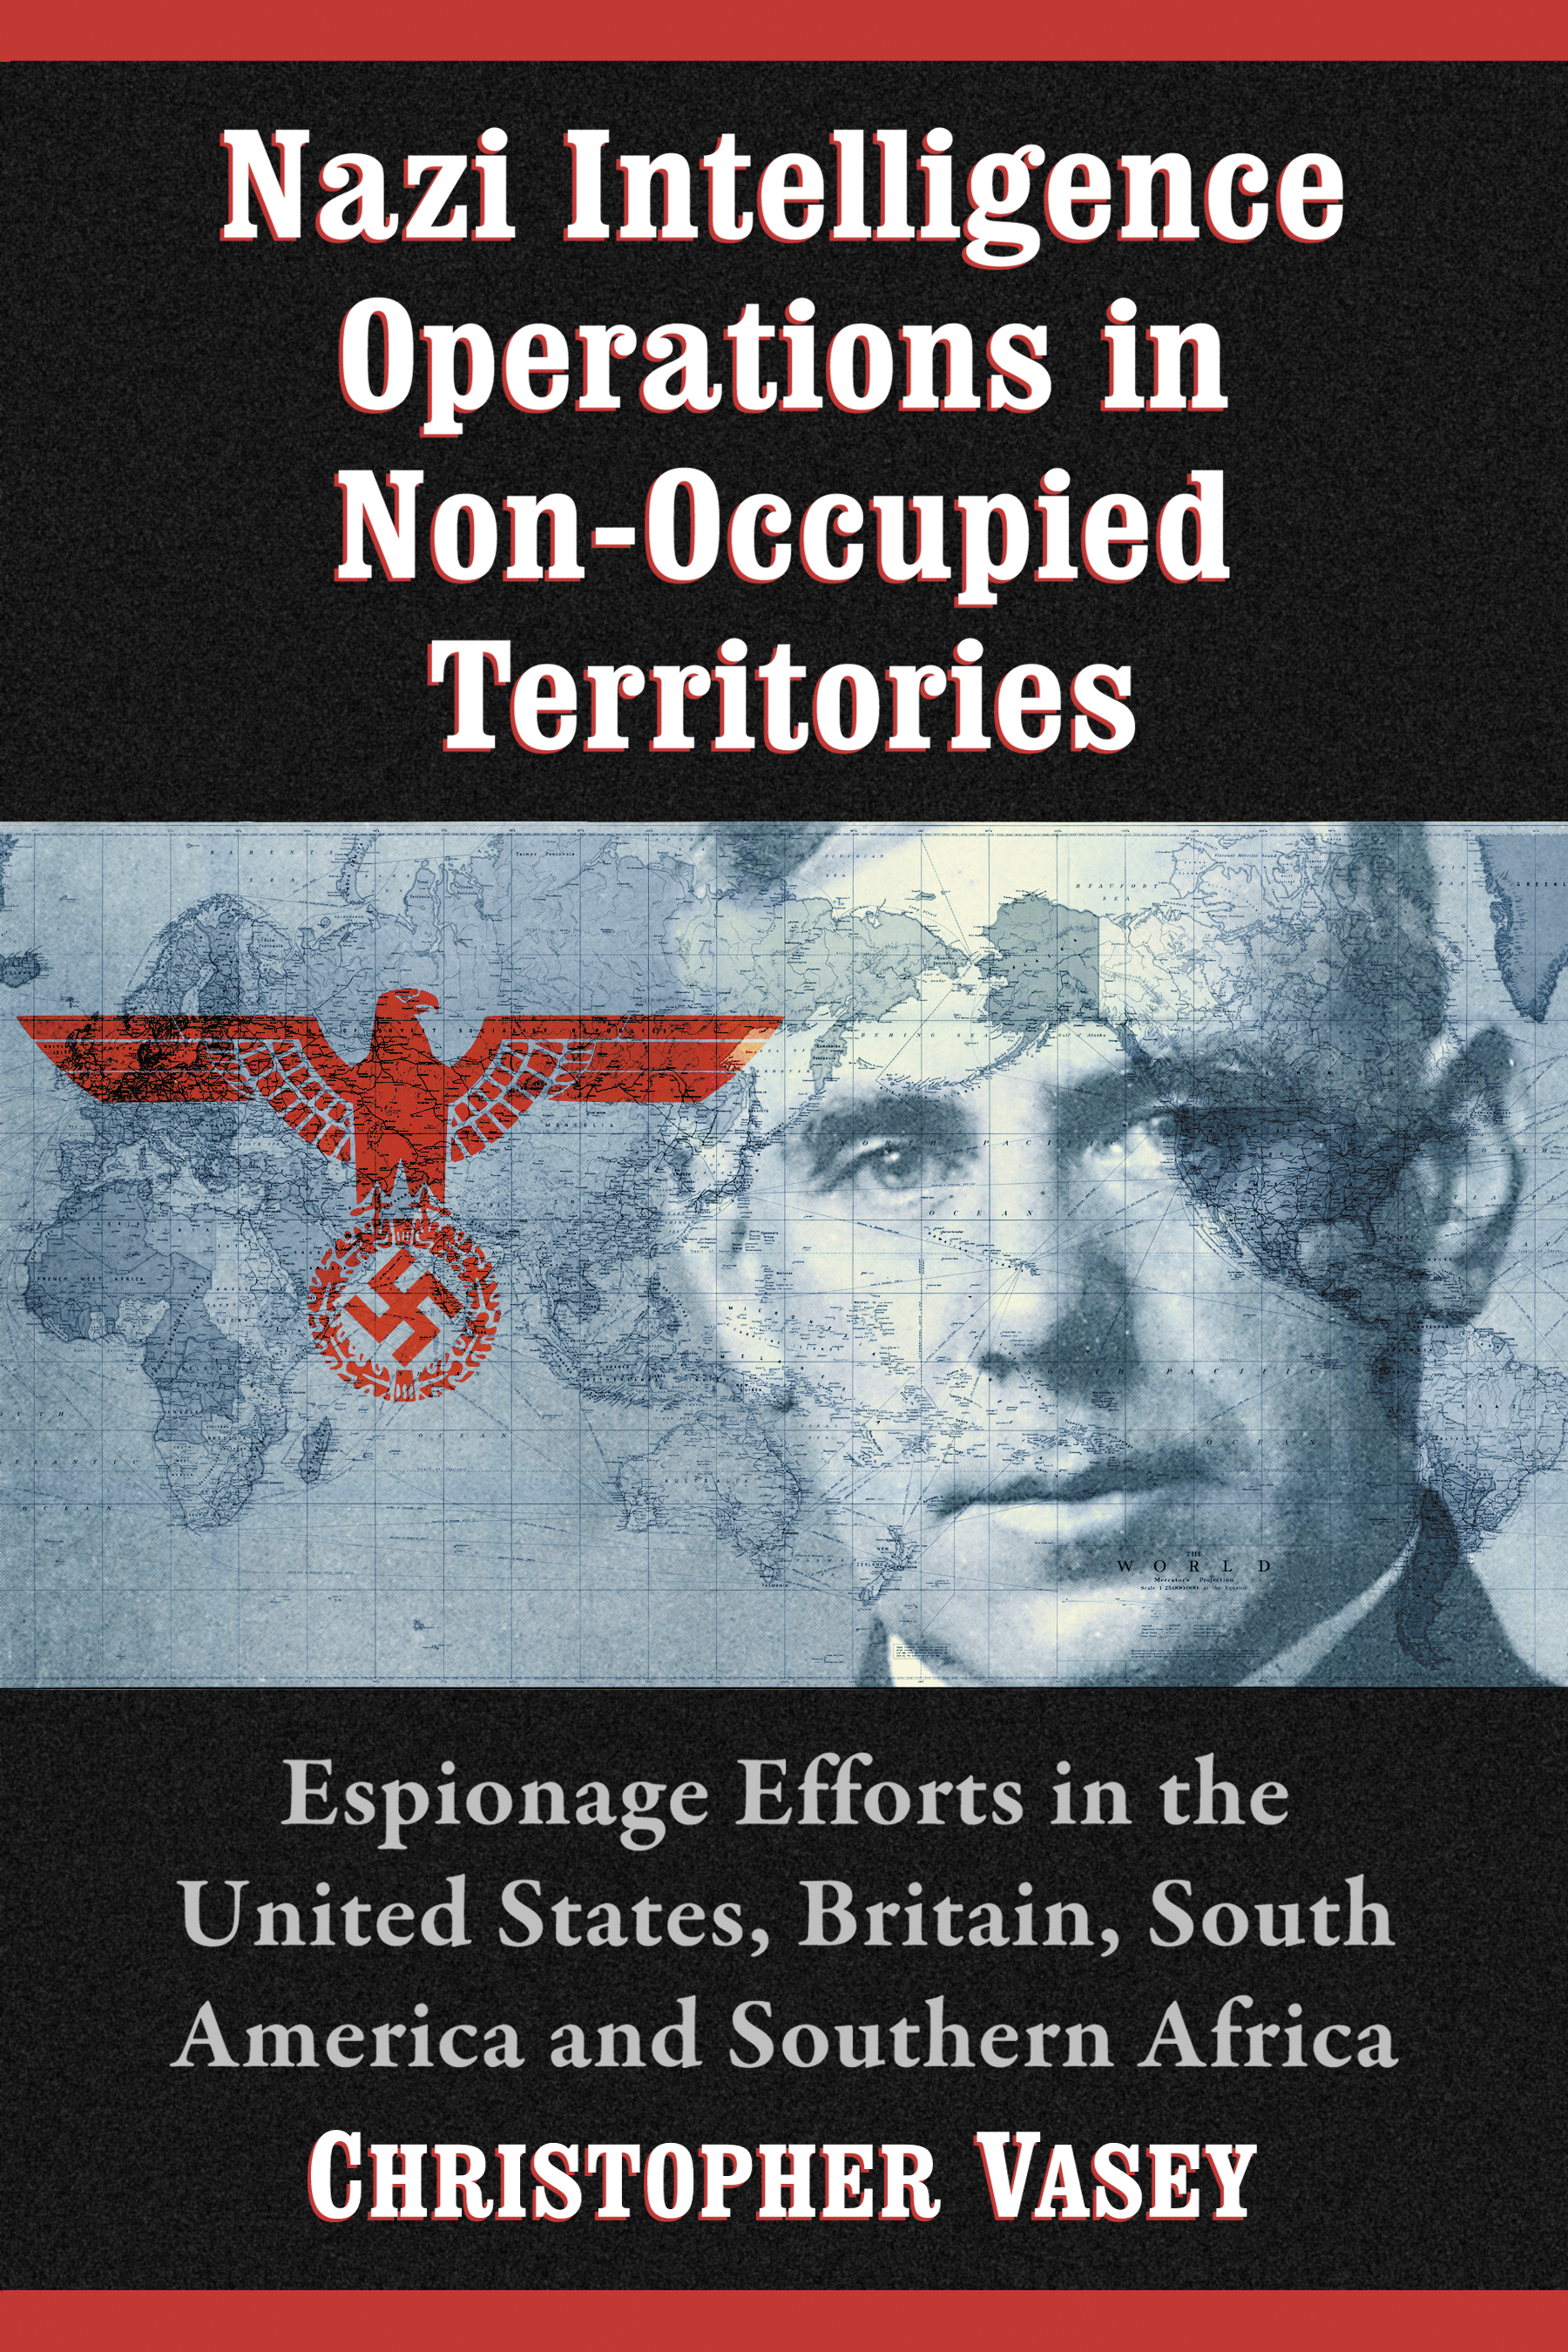 Nazi Intelligence Operations in Non-Occupied Territories - 15-24.99